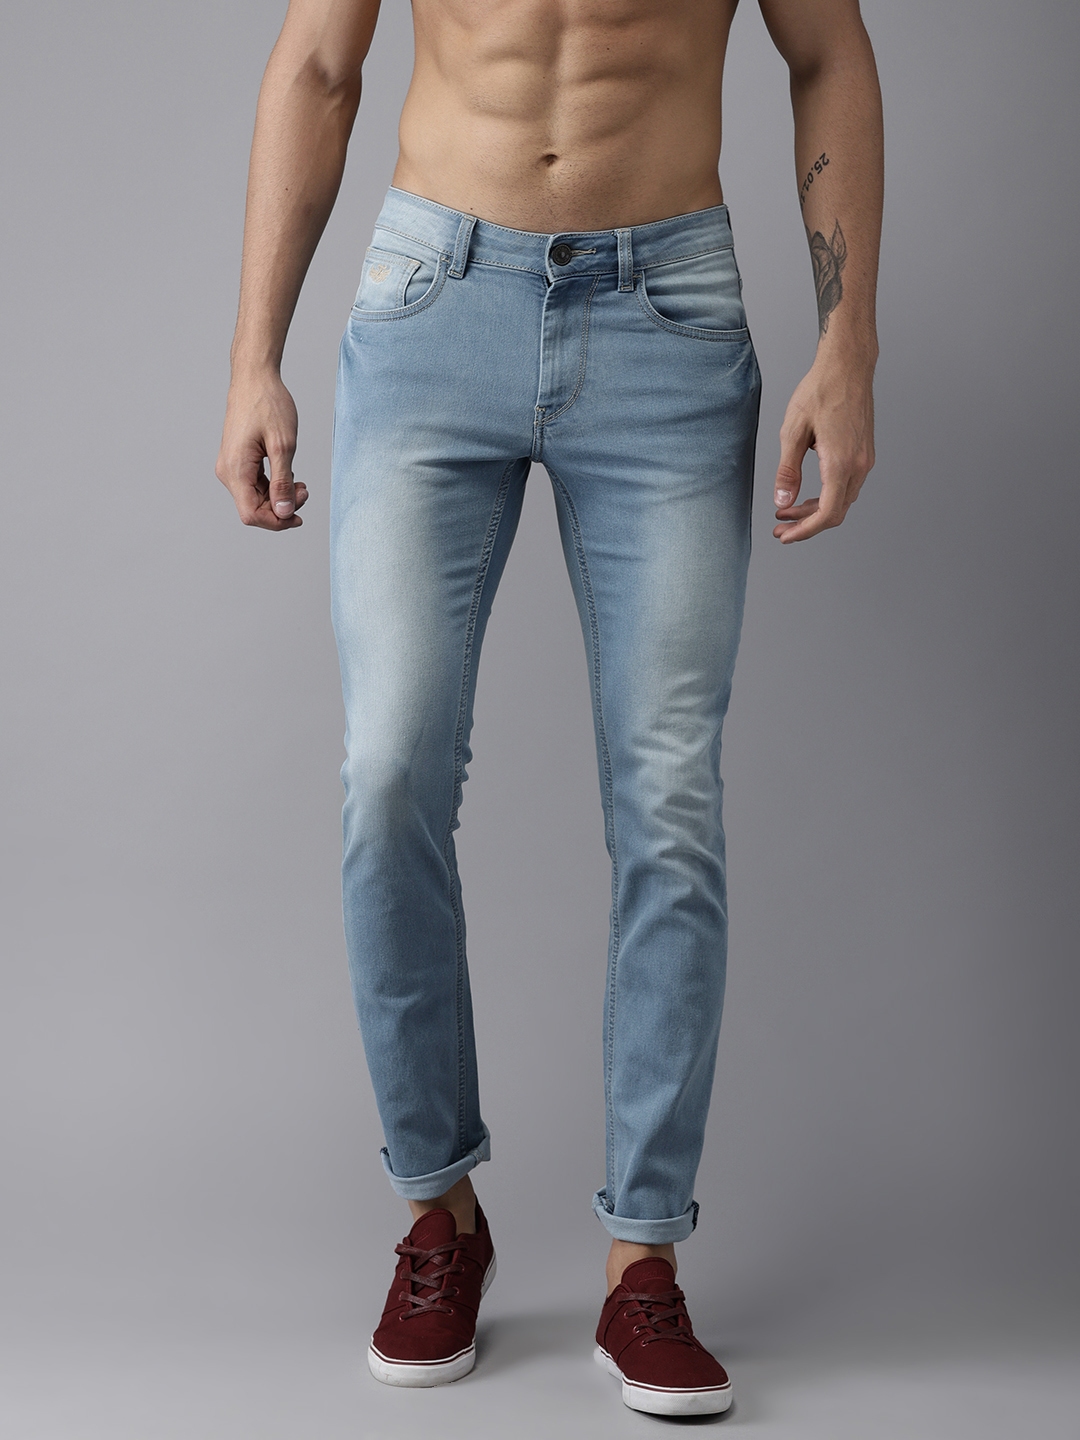 flying machine stretchable jeans